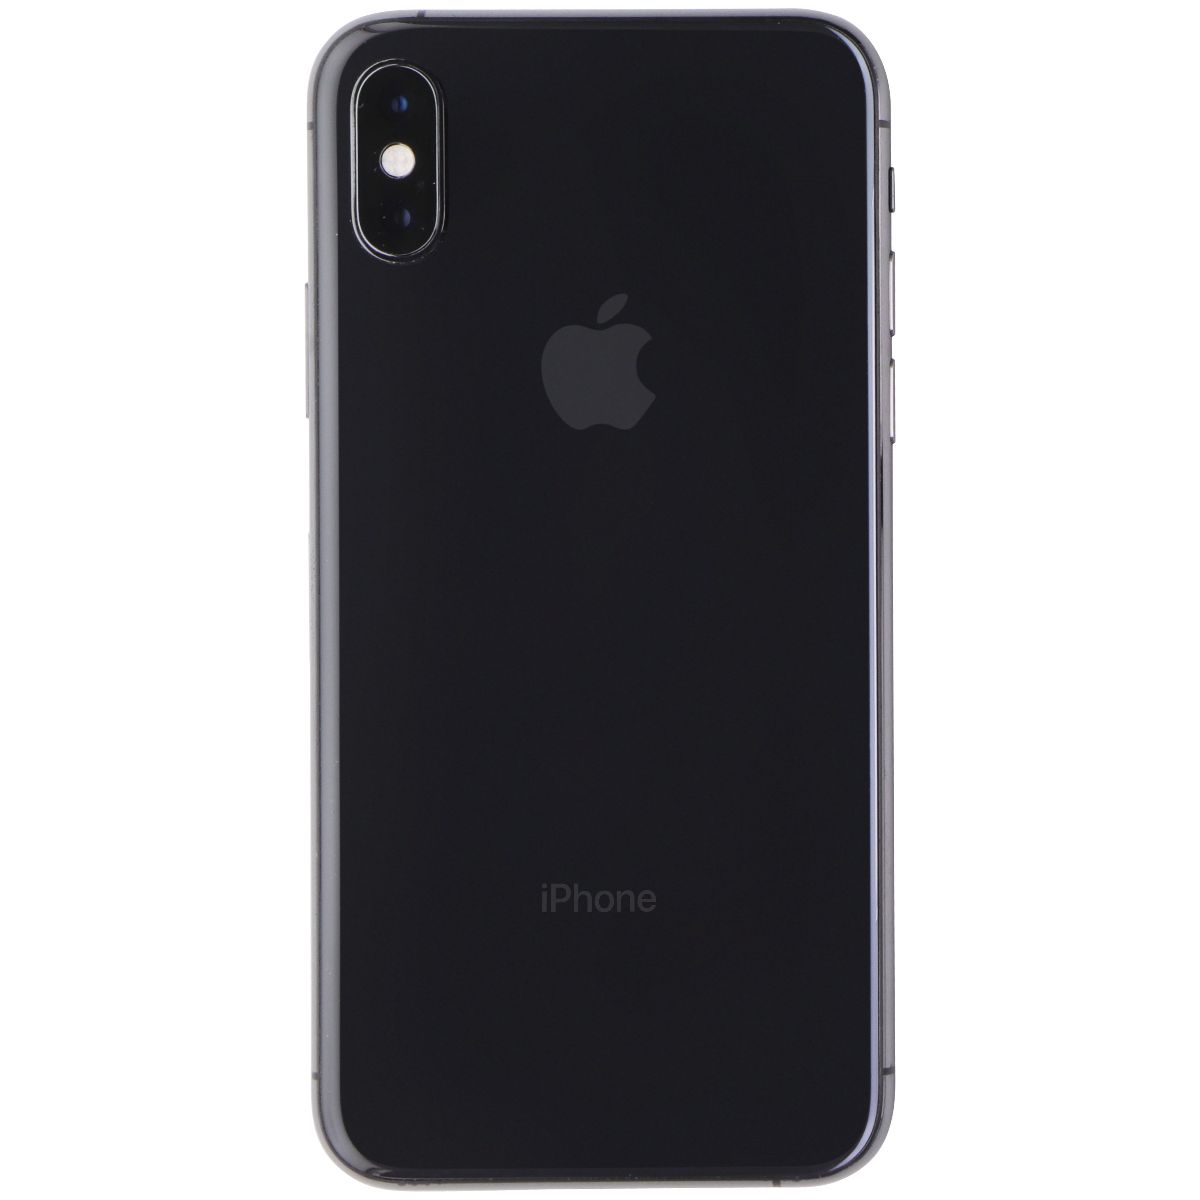 Apple iPhone XS (5.8-inch)(A1920) Unlocked - 64GB / Space Gray/ Bad Face ID* Cell Phones & Smartphones Apple    - Simple Cell Bulk Wholesale Pricing - USA Seller